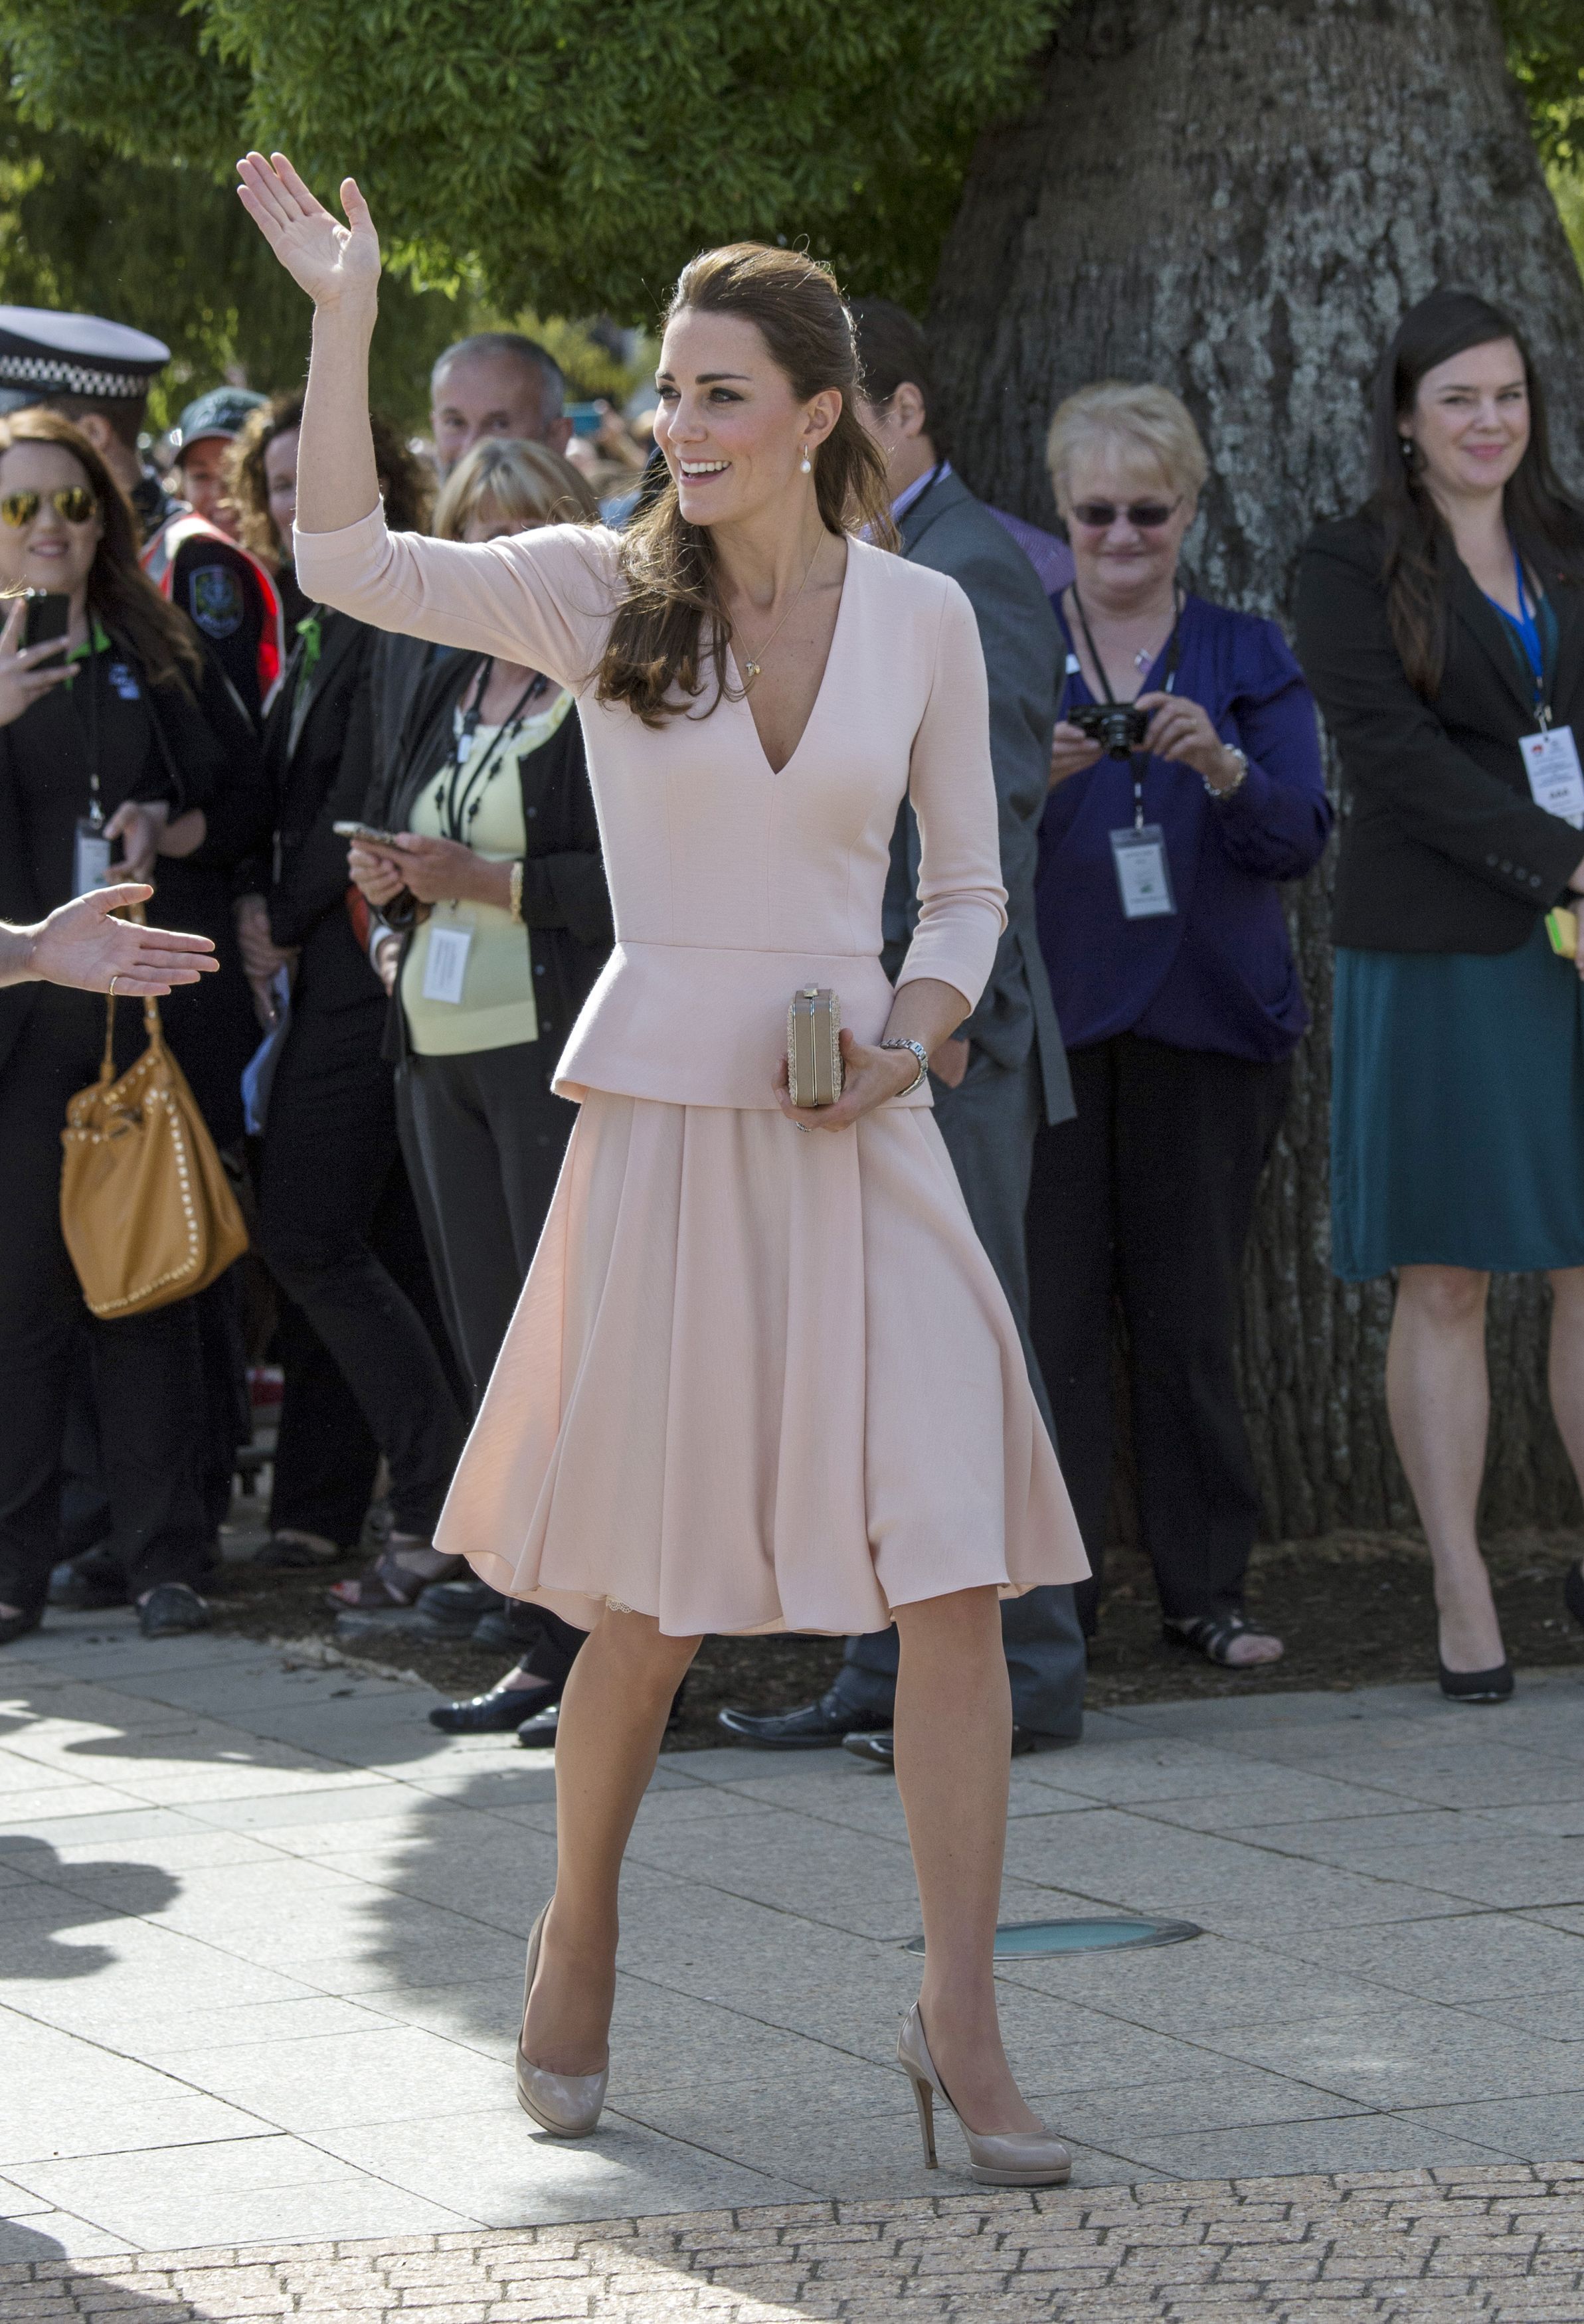 The Duchess of Cambridge meets well wishers outside The Northern Sound System in Adelaide, Australia, on April 23, 2014.